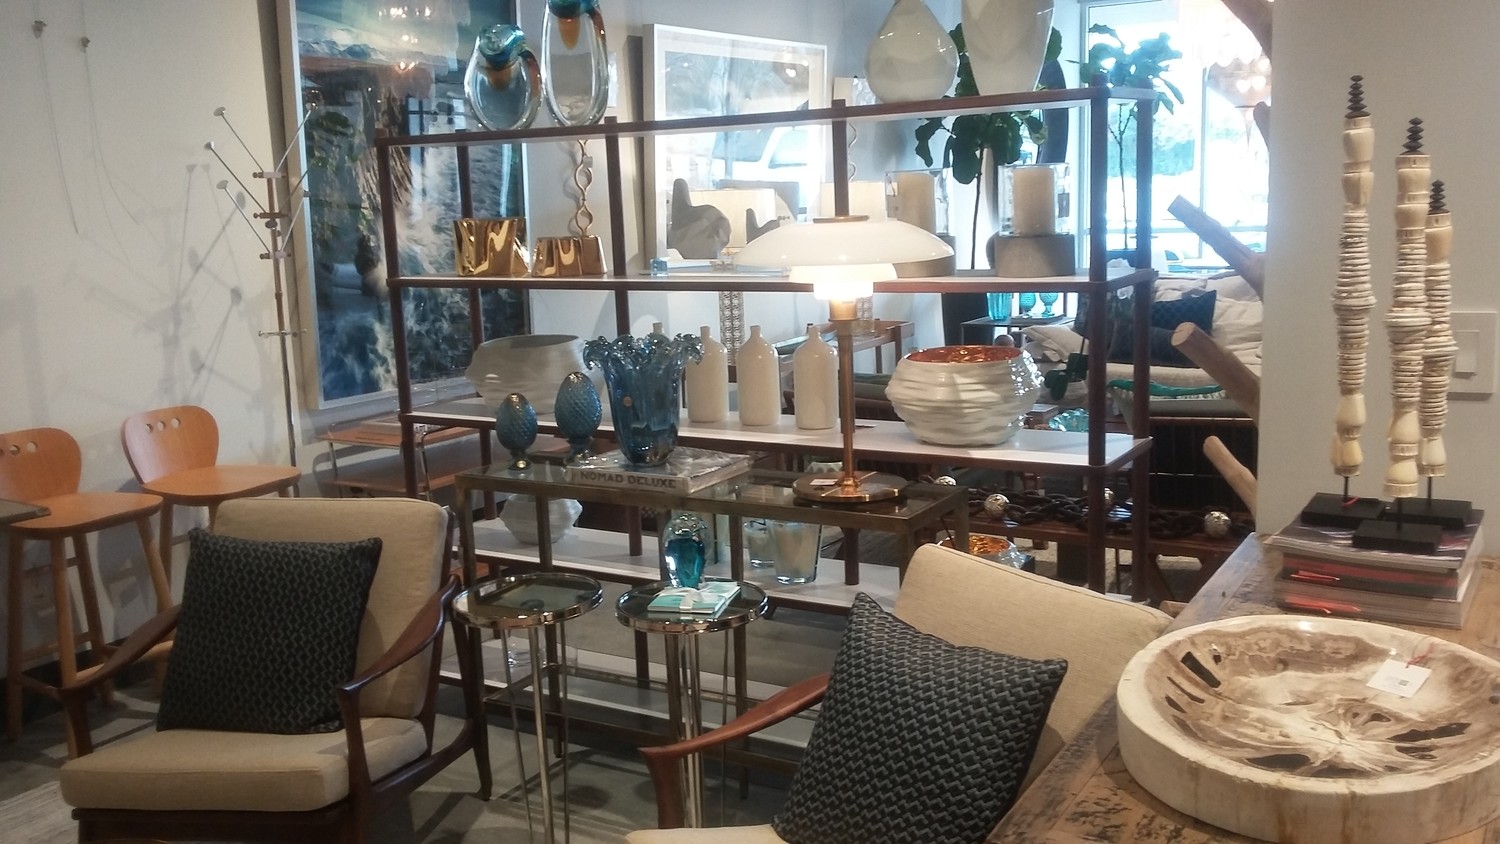 Oca Studio in Ponte Vedra Beach, which opened about three months ago, offers contemporary furniture and design elements from all over the world.